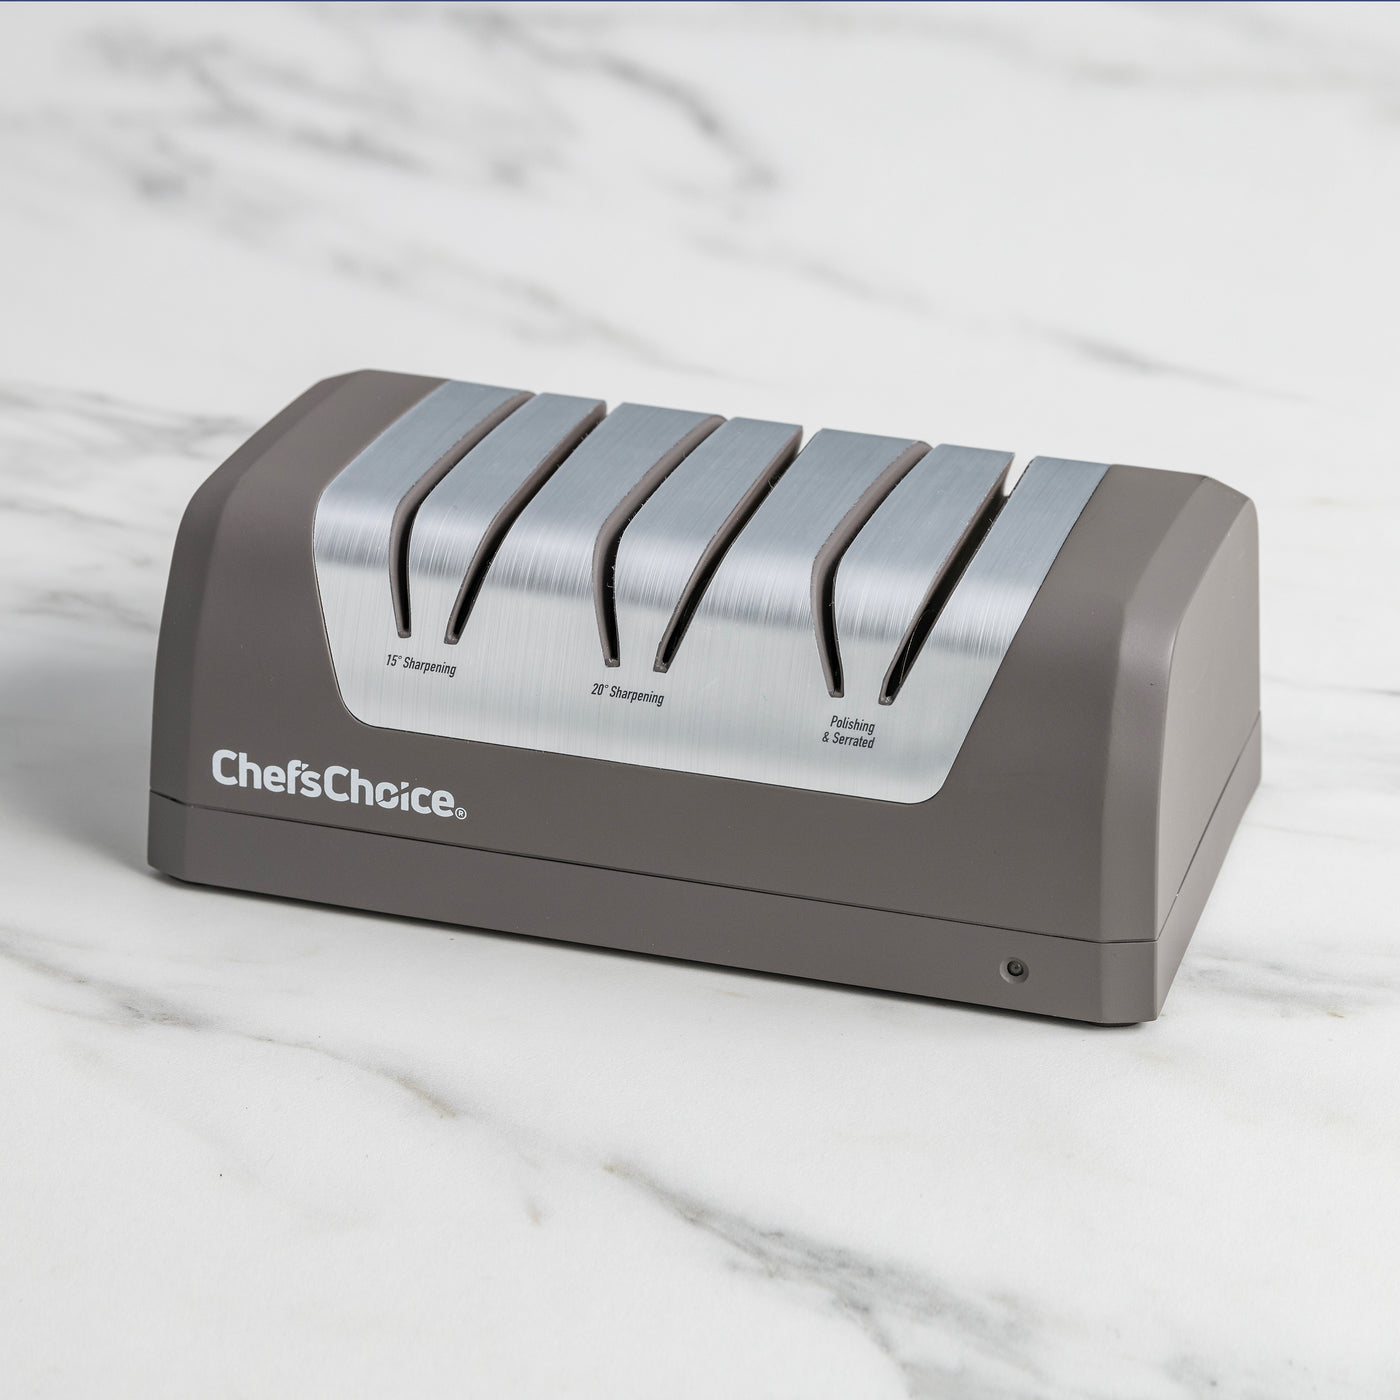 Chef's Choice AngleSelect Sharpener, Model 1520 